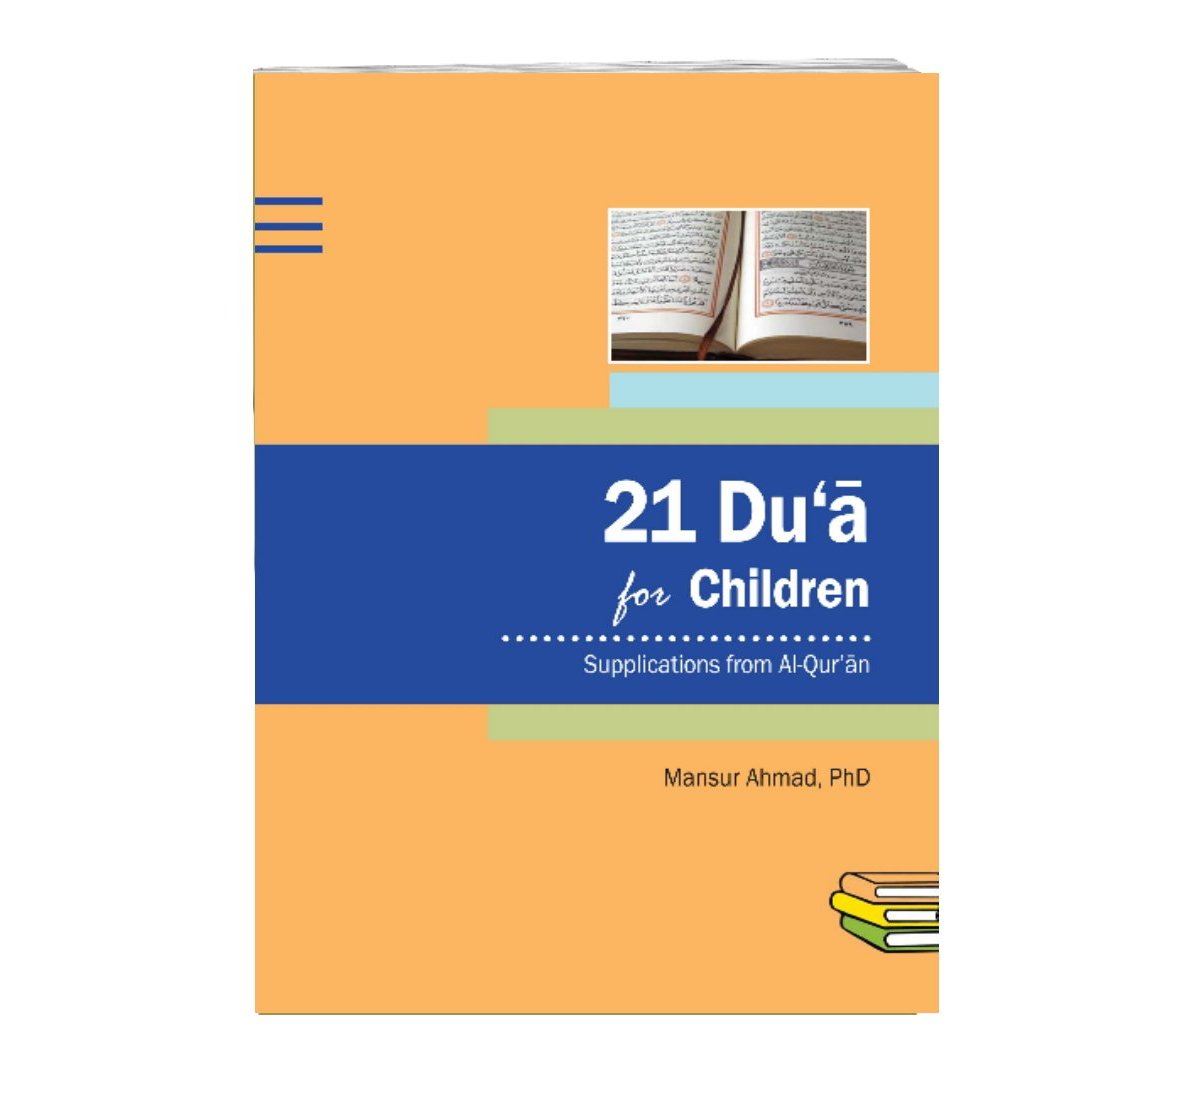 21 Dua for Children from Weekend Learning Publishers - Mansur Ahmad, PhD - Book Cover